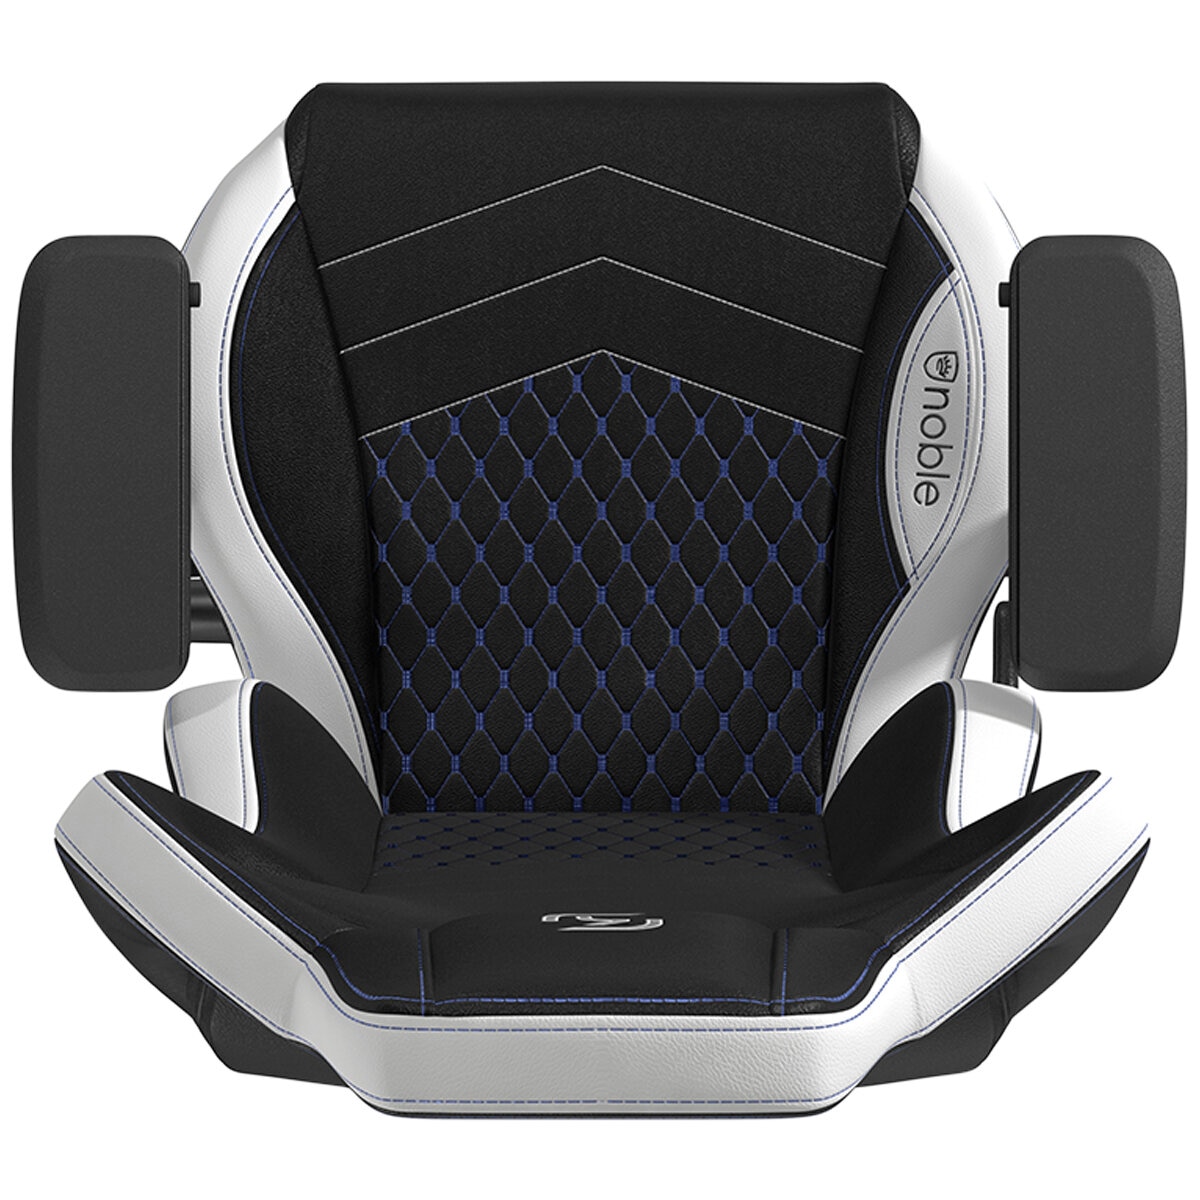 NobleChairs Epic Series SK Gaming Chair Black Blue White